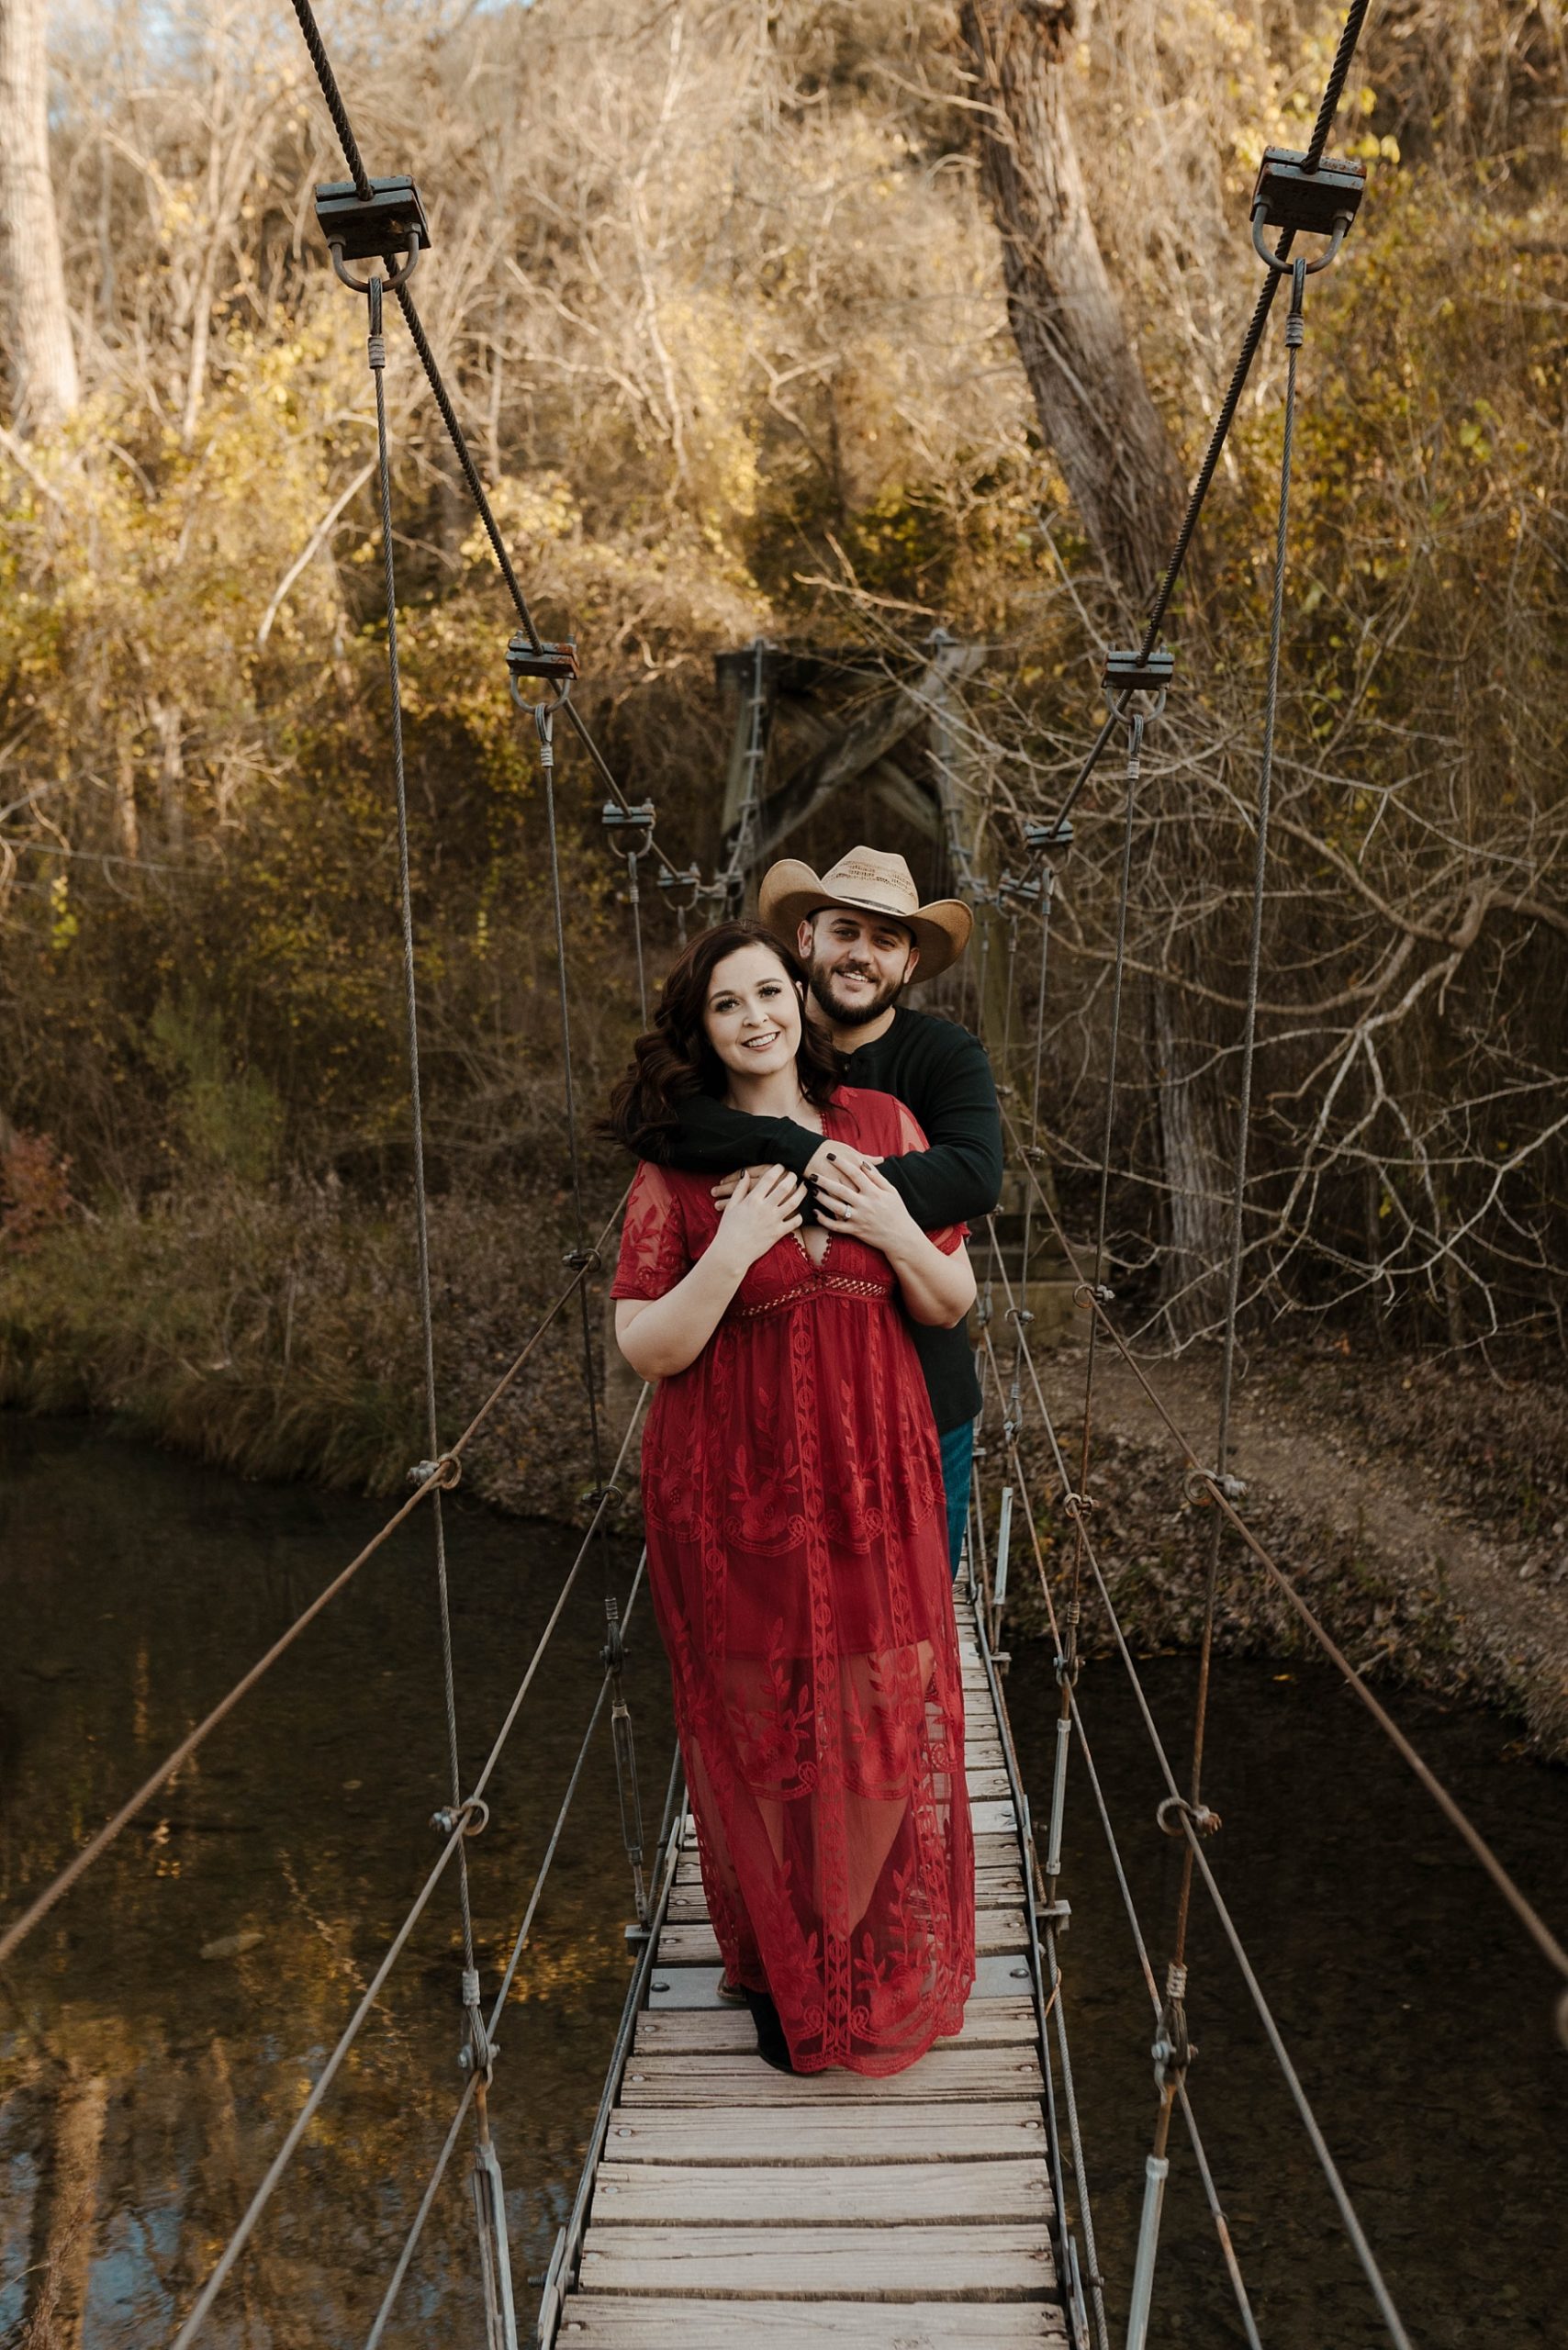 The Best Location for Couples Photos in Texas | Destination Couples